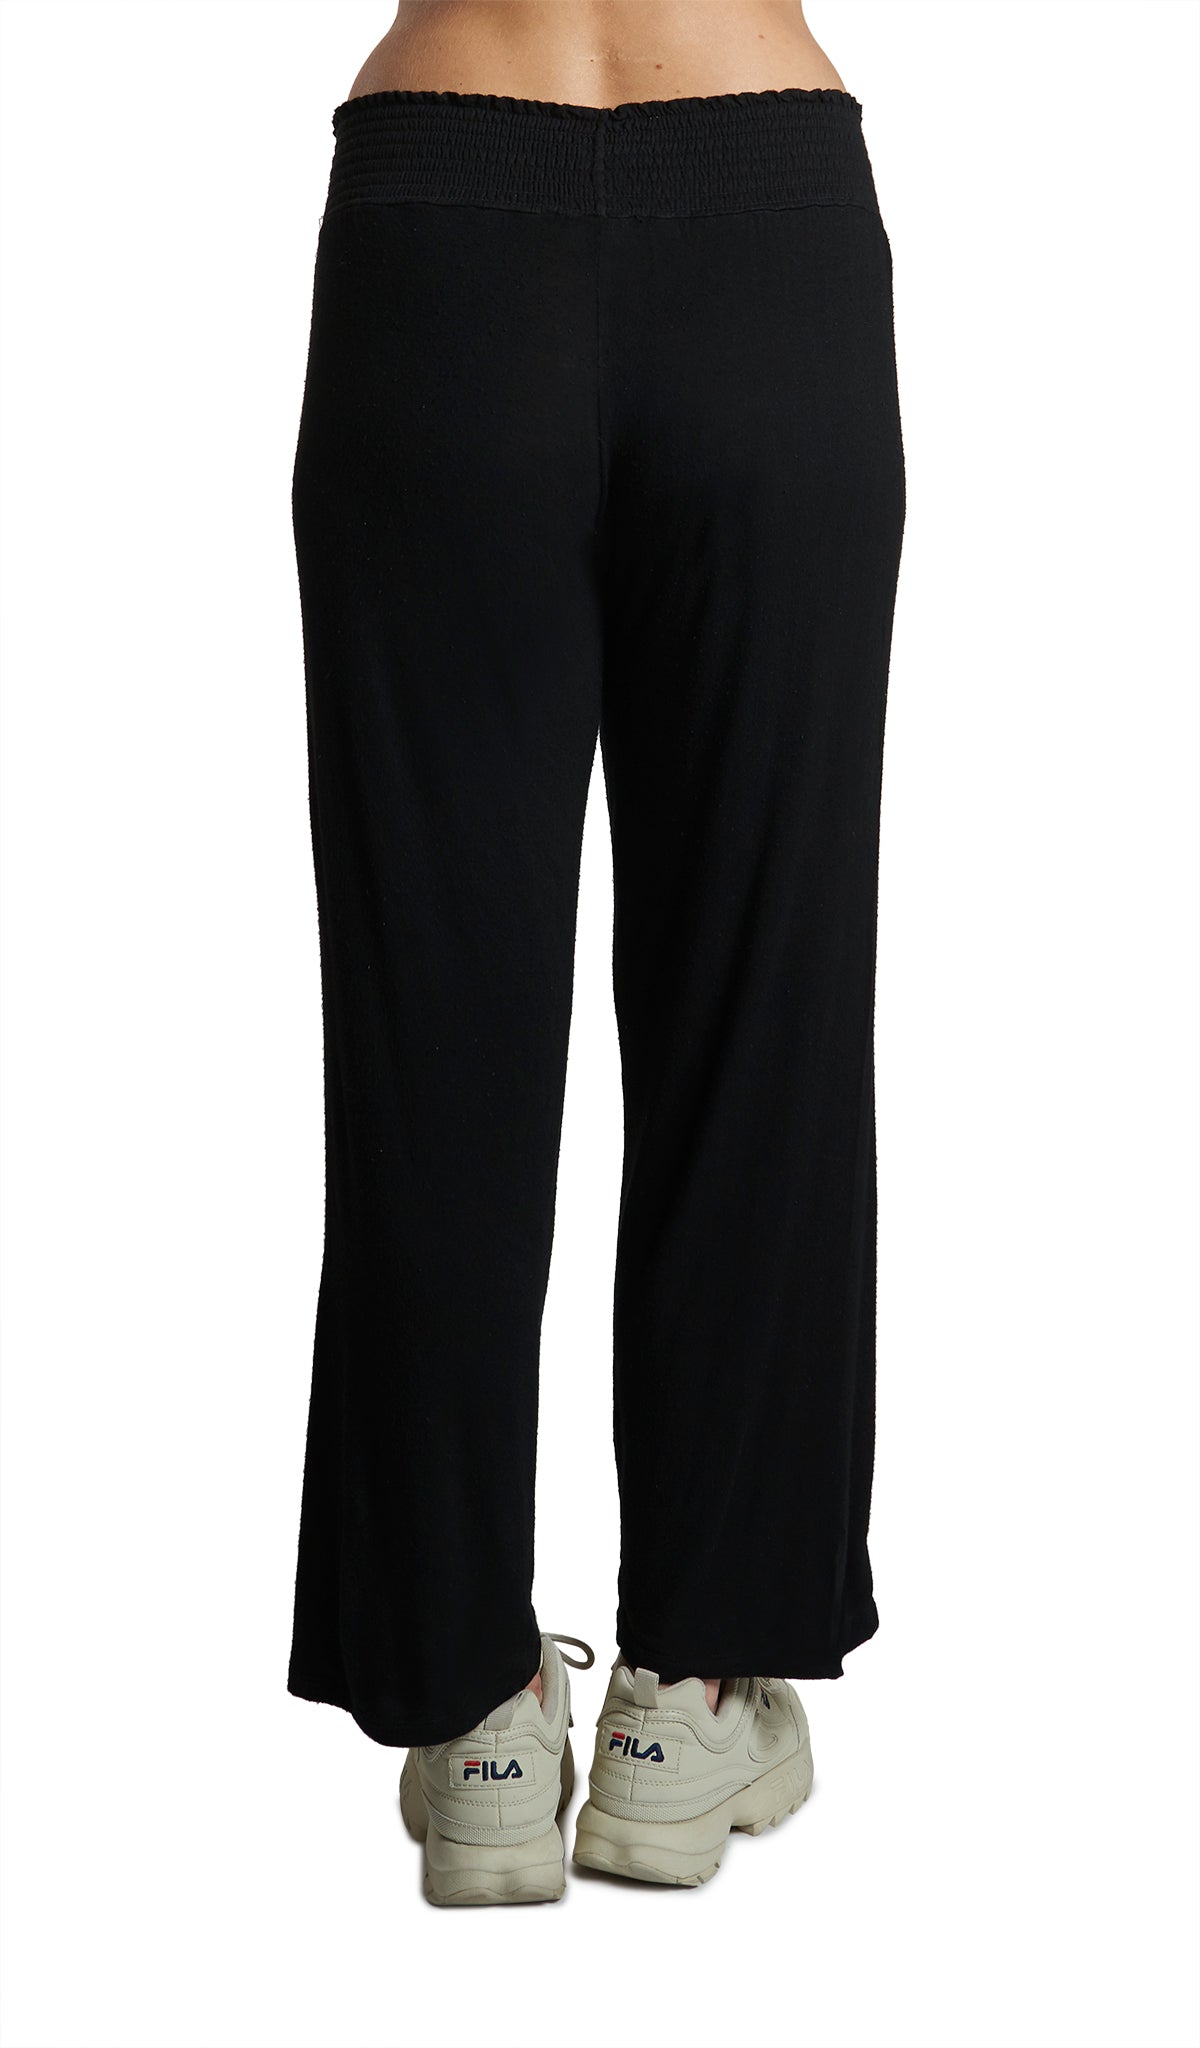 Black Pirlo Pant. Back shot of pirlo pant shown waist down on woman wearing with tennis shoes.